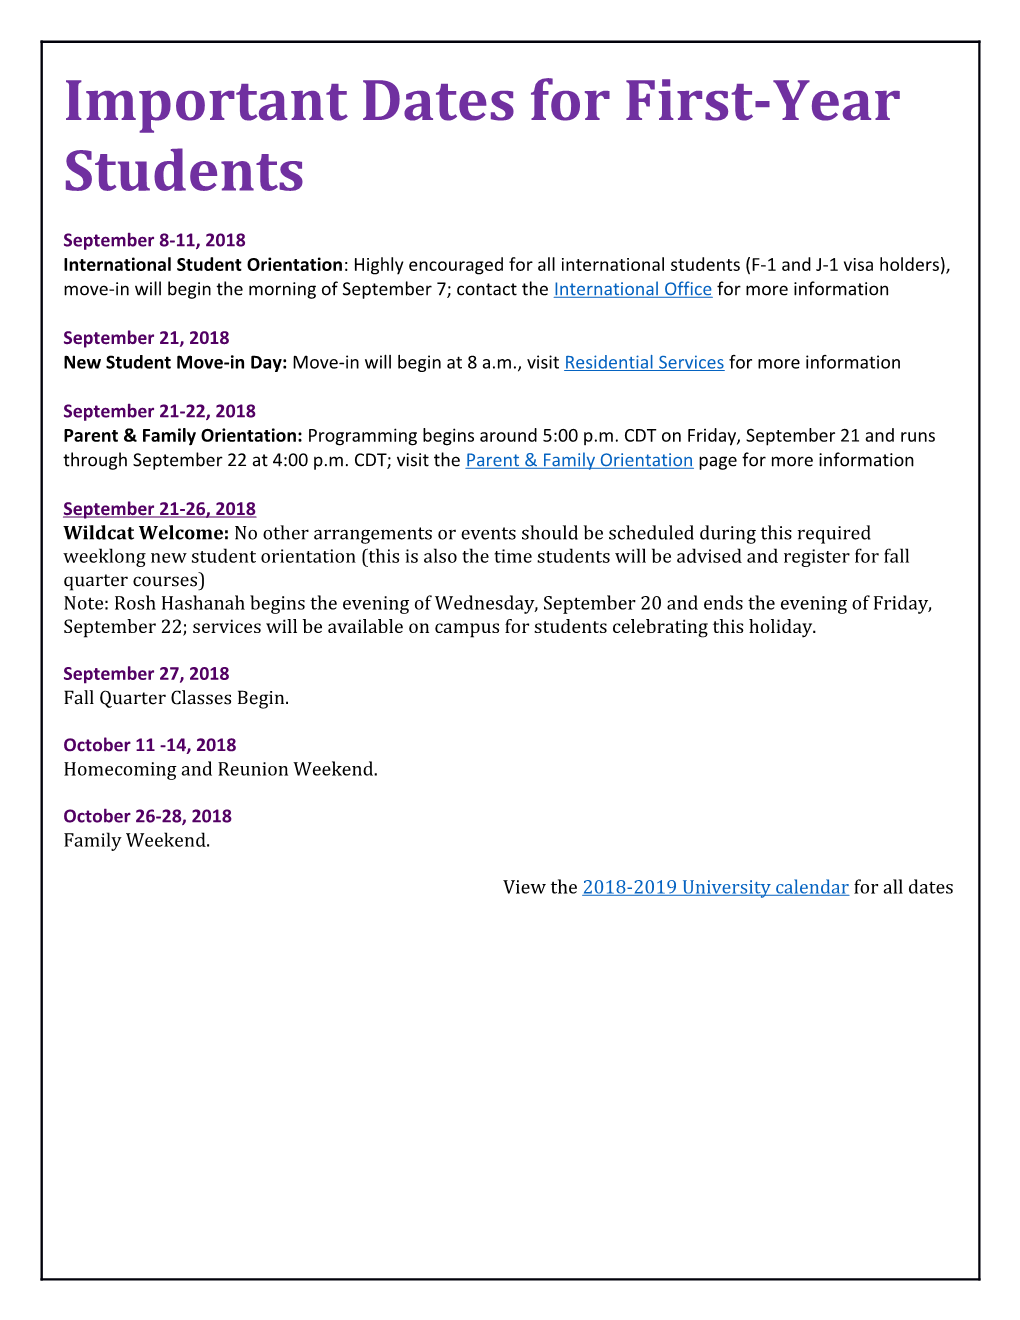 Important Dates for First-Year Students